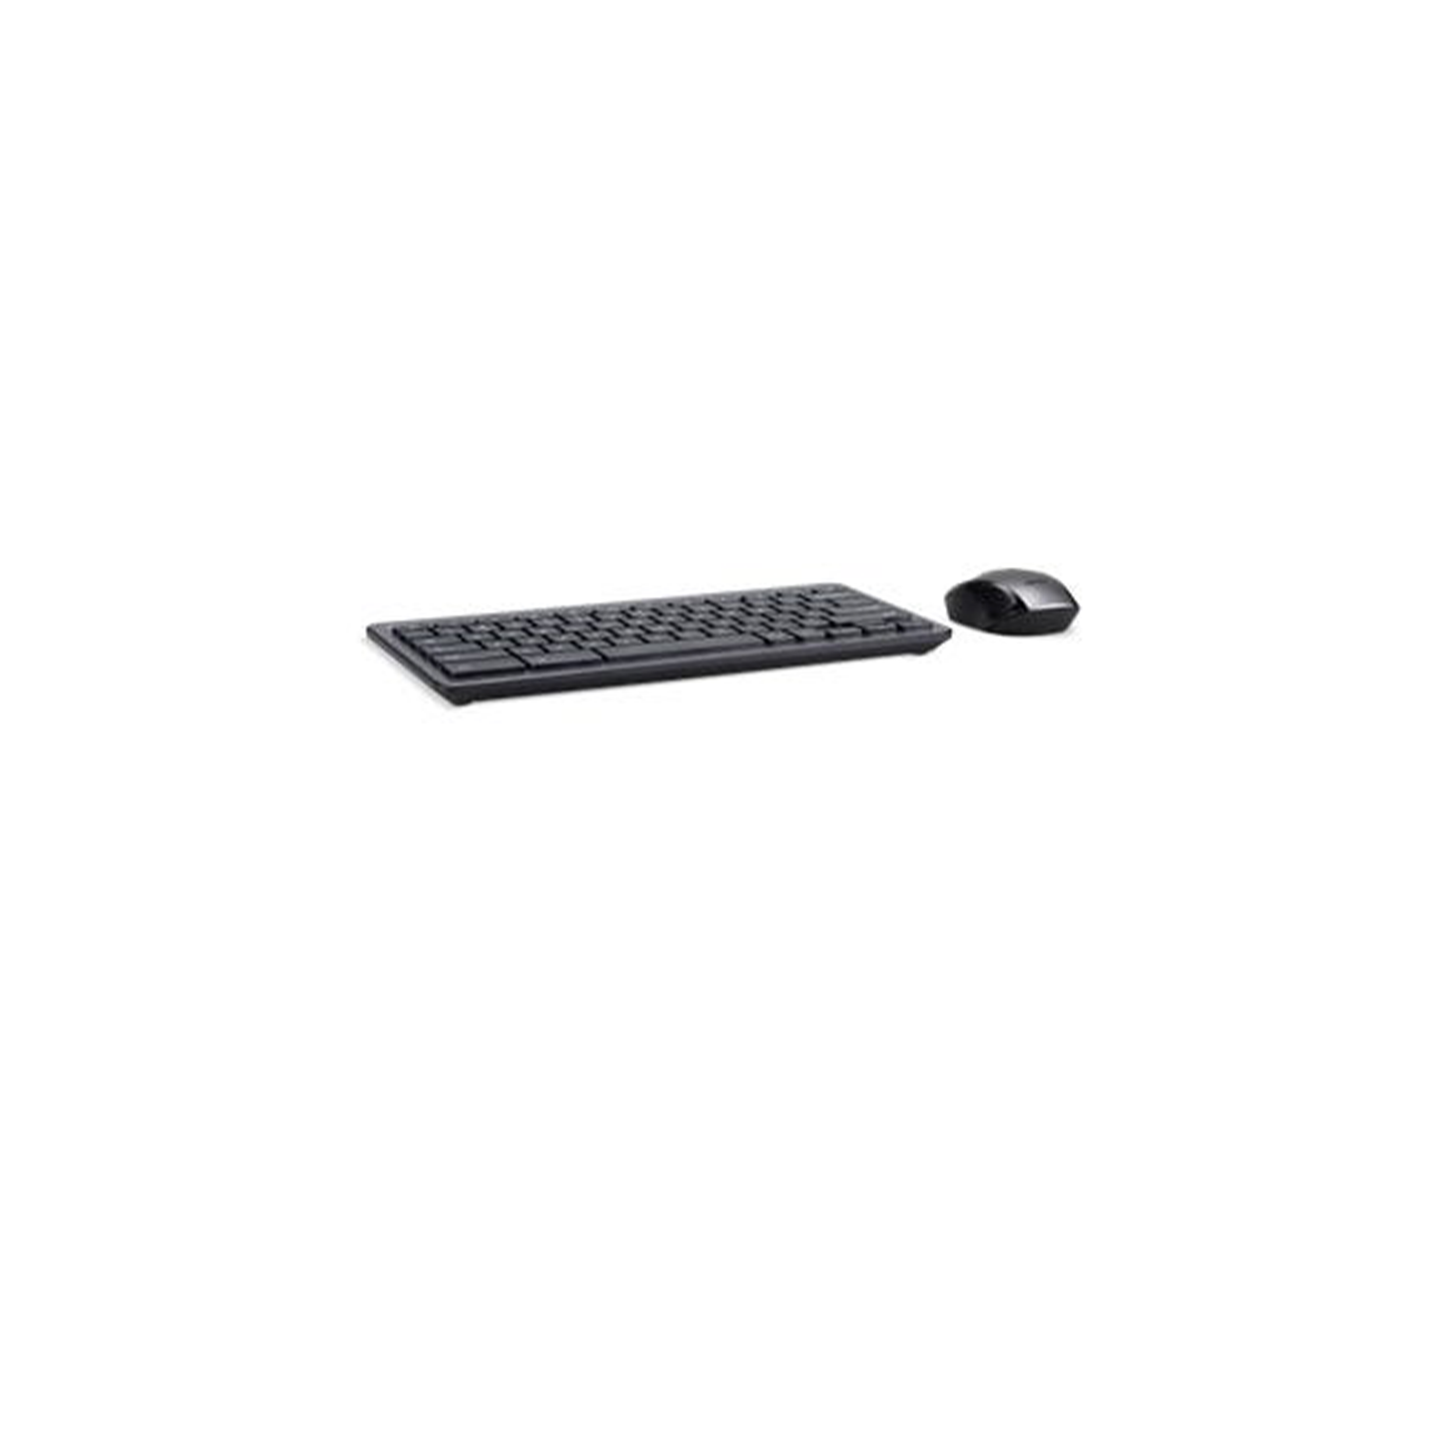 Acer Chrome wireless keyboard and mouse - UK Layout